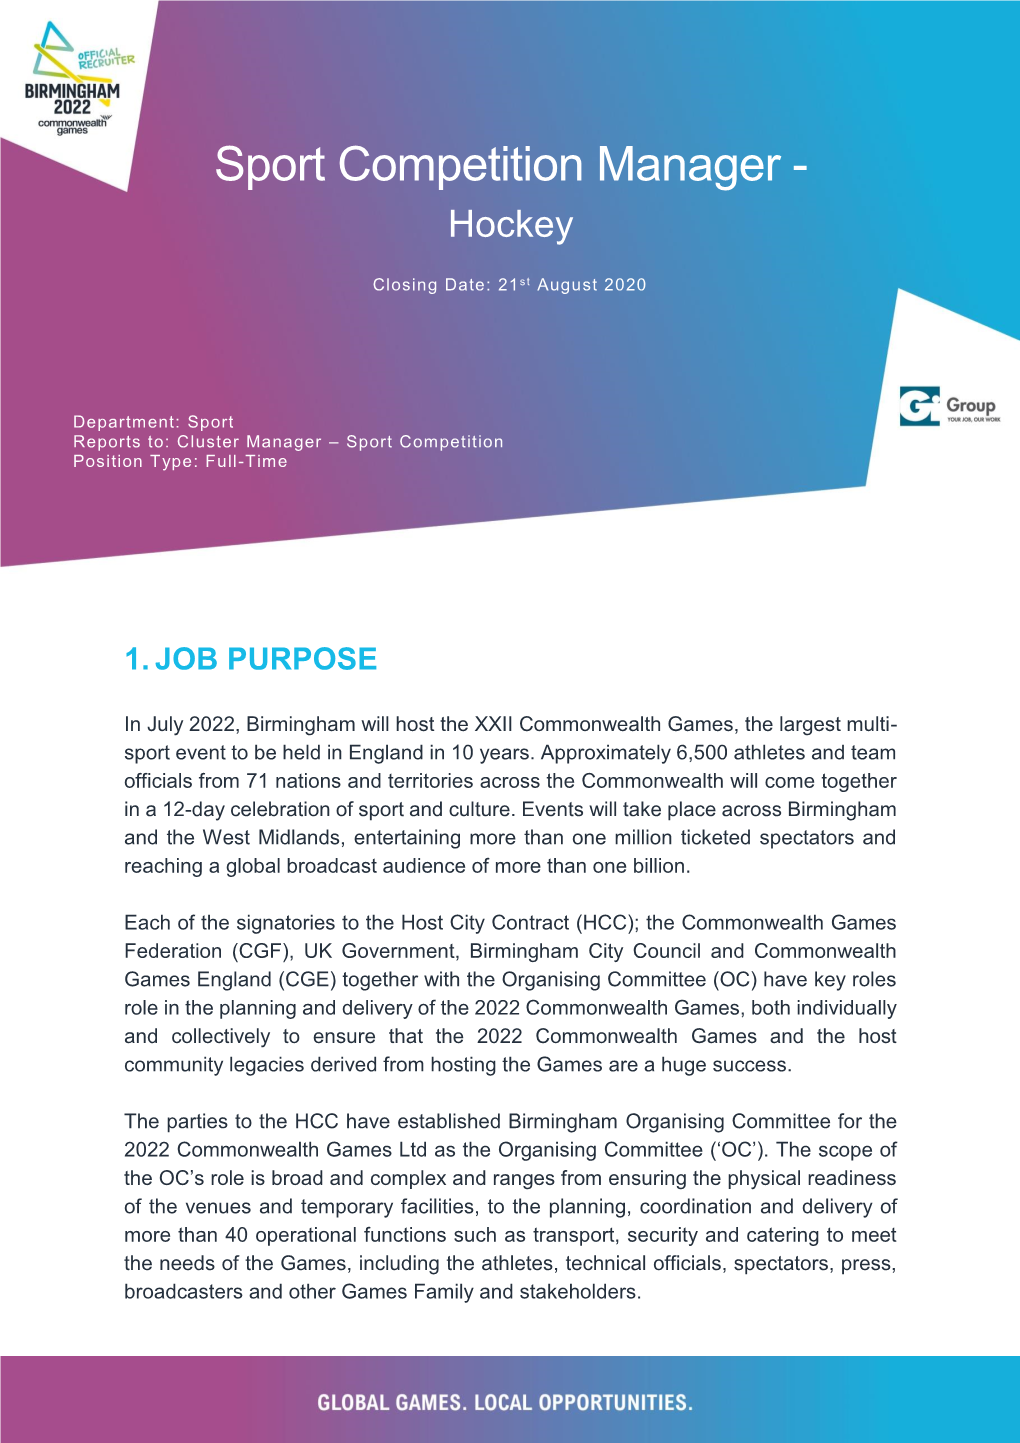 Sport Competition Manager - Hockey